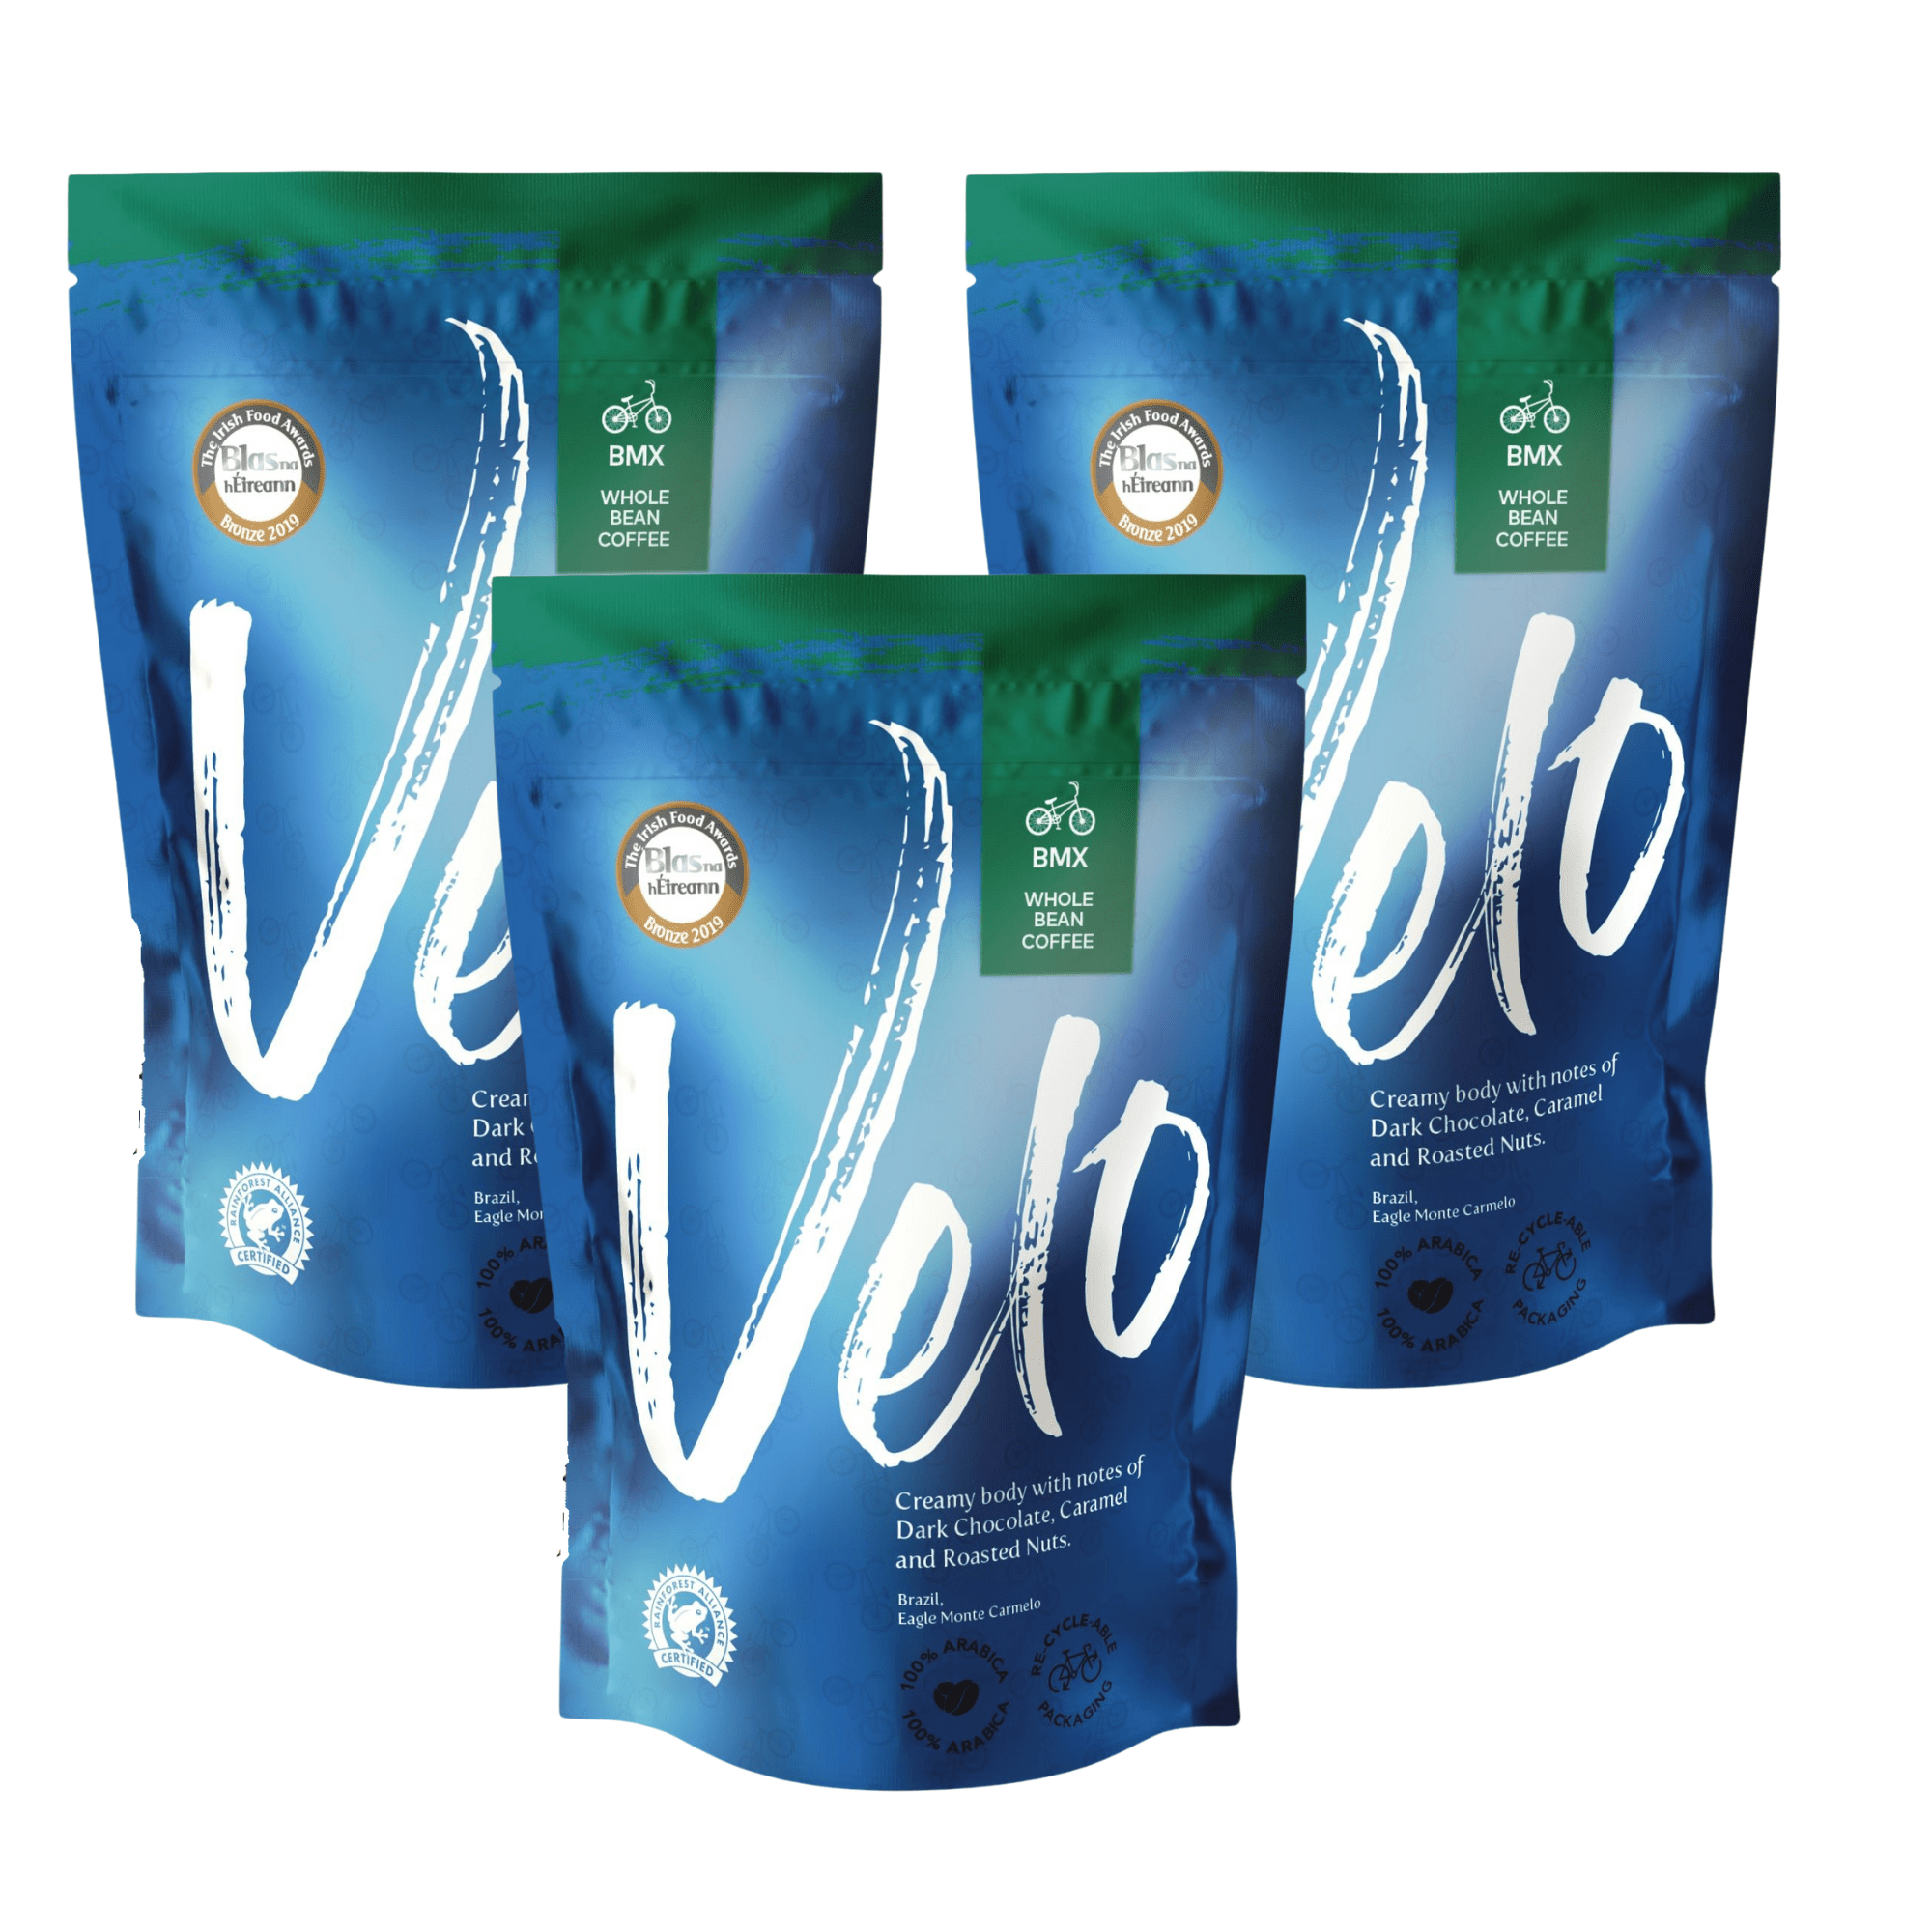 BMX 700g Coffee From Brazil  Blue and Green Bag Bundle - Three in a box - Velo Coffee Roasters